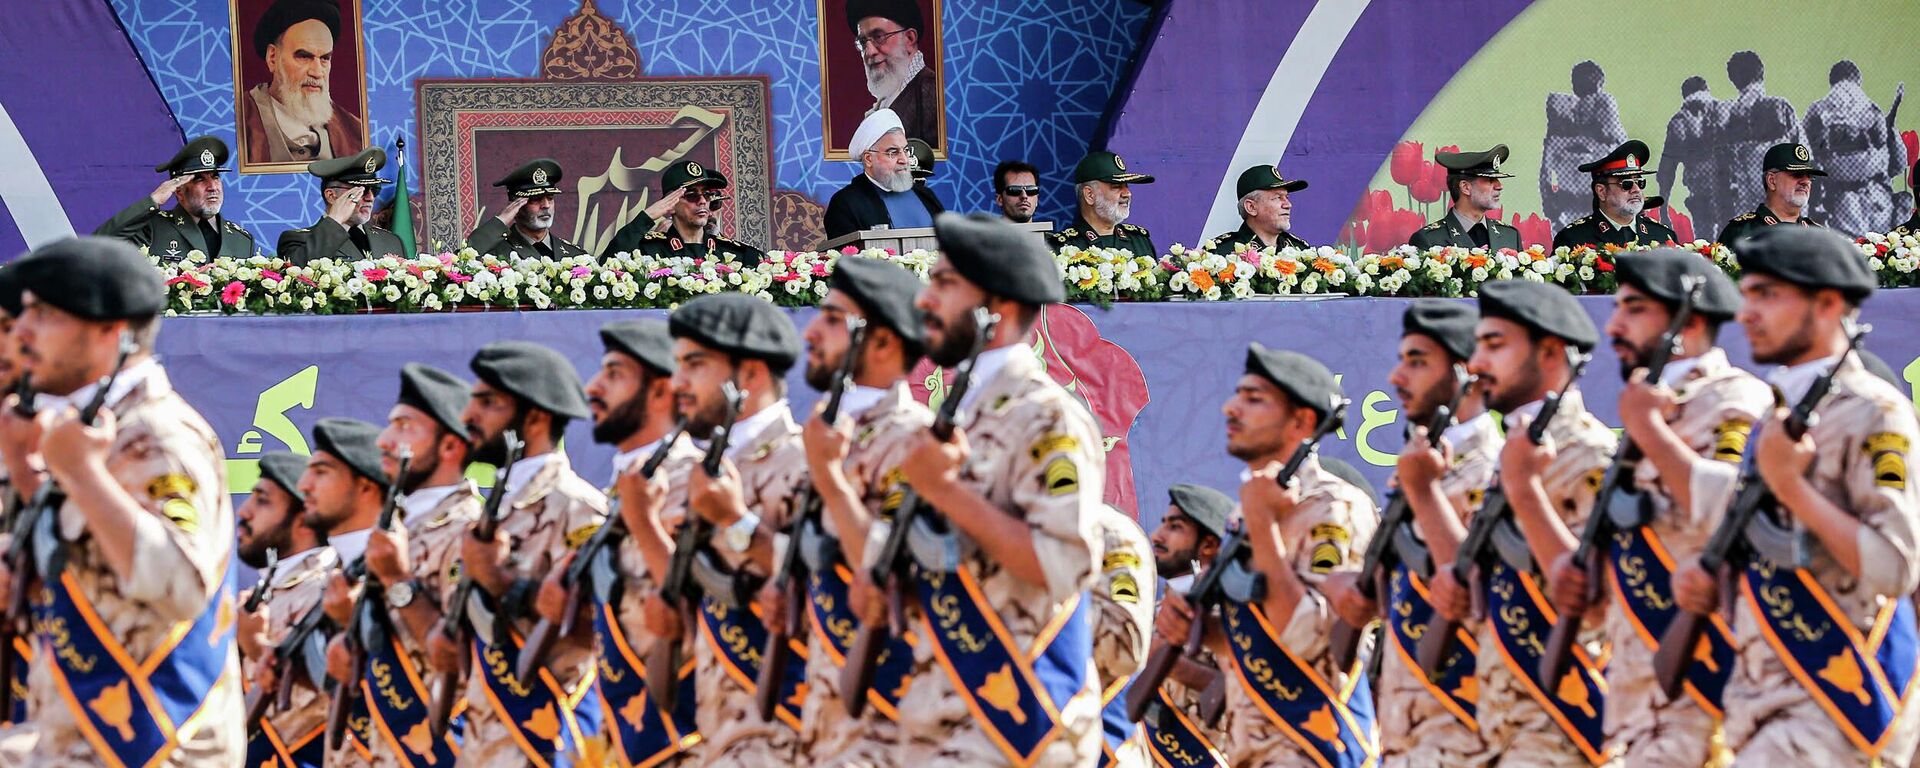 A handout picture provided by the Iranian presidency on September 22, 2019 shows President Hassan Rouhani (C) and other top military commanders watching members the Islamic Revolutionary Guard Corps (IRGC) marching past during the annual Sacred Defence Week military parade marking the anniversary of the outbreak of the devastating 1980-1988 war with Saddam Hussein's Iraq, in the capital Tehran. - Rouhani said on September 22 that the presence of foreign forces creates insecurity in the Gulf, after the US ordered the deployment of more troops to the region. Foreign forces can cause problems and insecurity for our people and for our region, Rouhani said in a televised speech at the annual military parade, adding that Iran would present to the UN a regional cooperation plan for peace. (Photo by Iranian Presidency / AFP) - Sputnik International, 1920, 24.05.2022